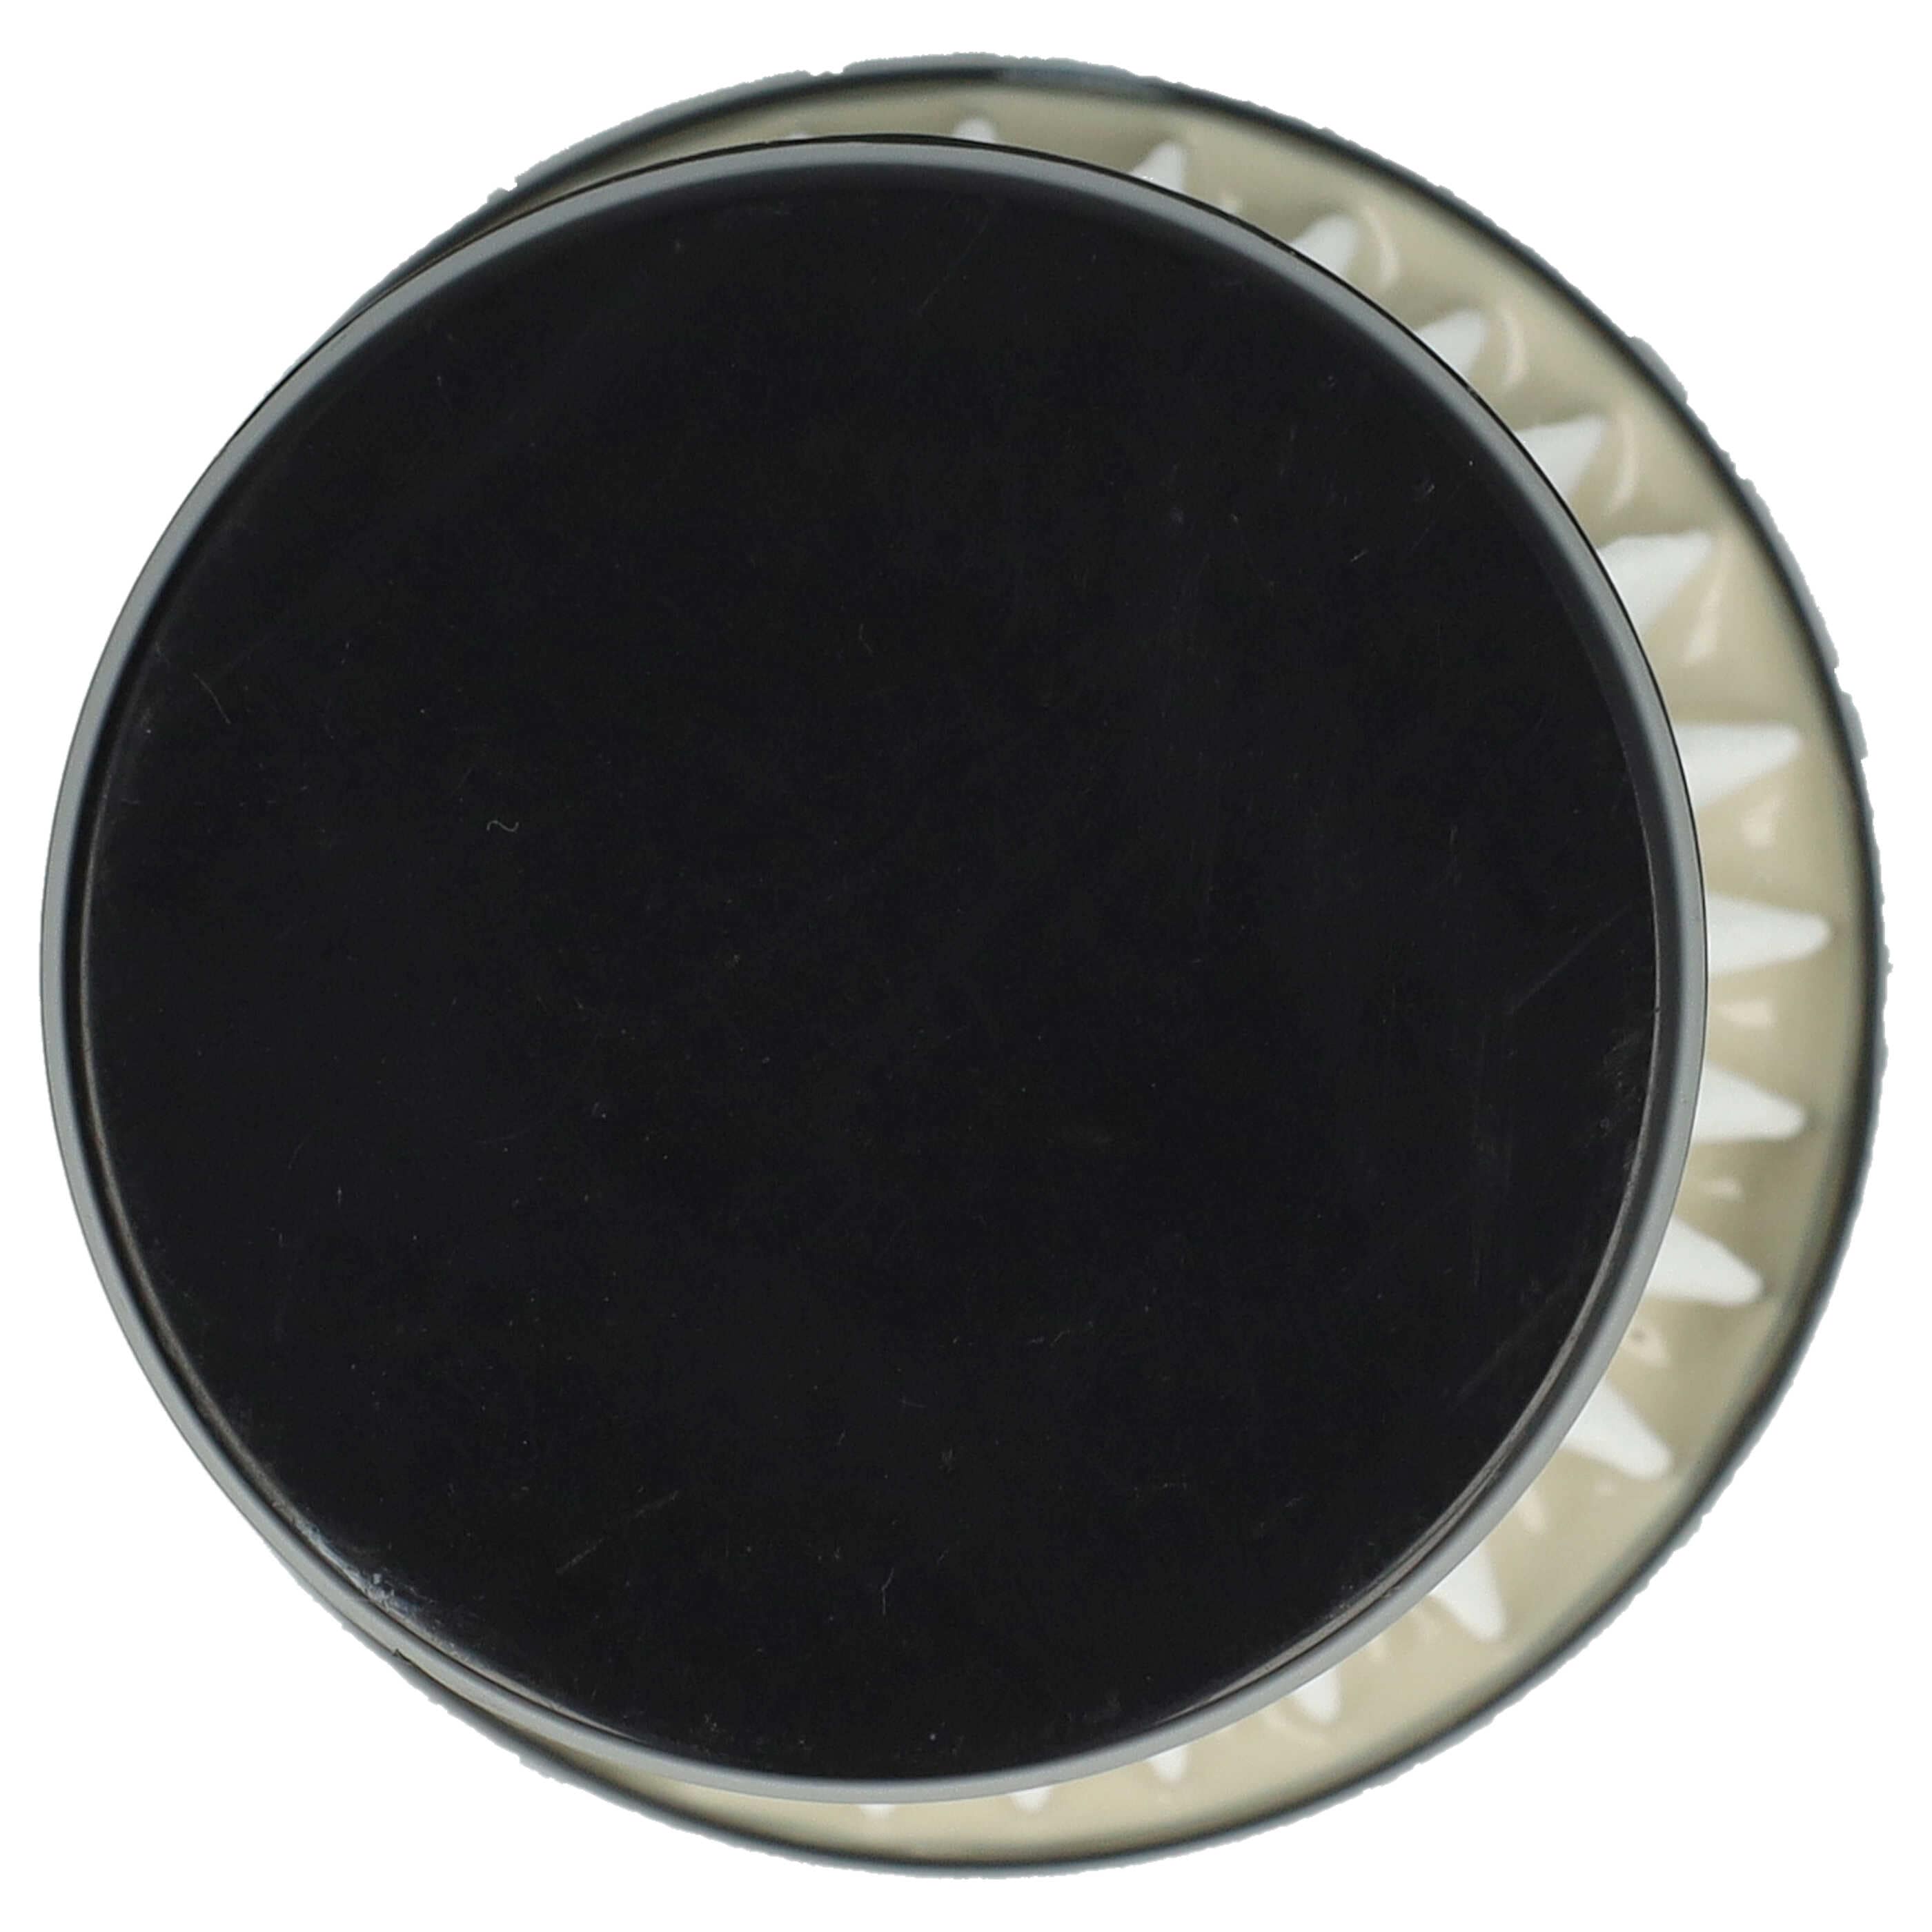 1x pleated filter replaces AEG AEF150, 9001683755, 90094073100 for Electrolux Vacuum Cleaner, black / white